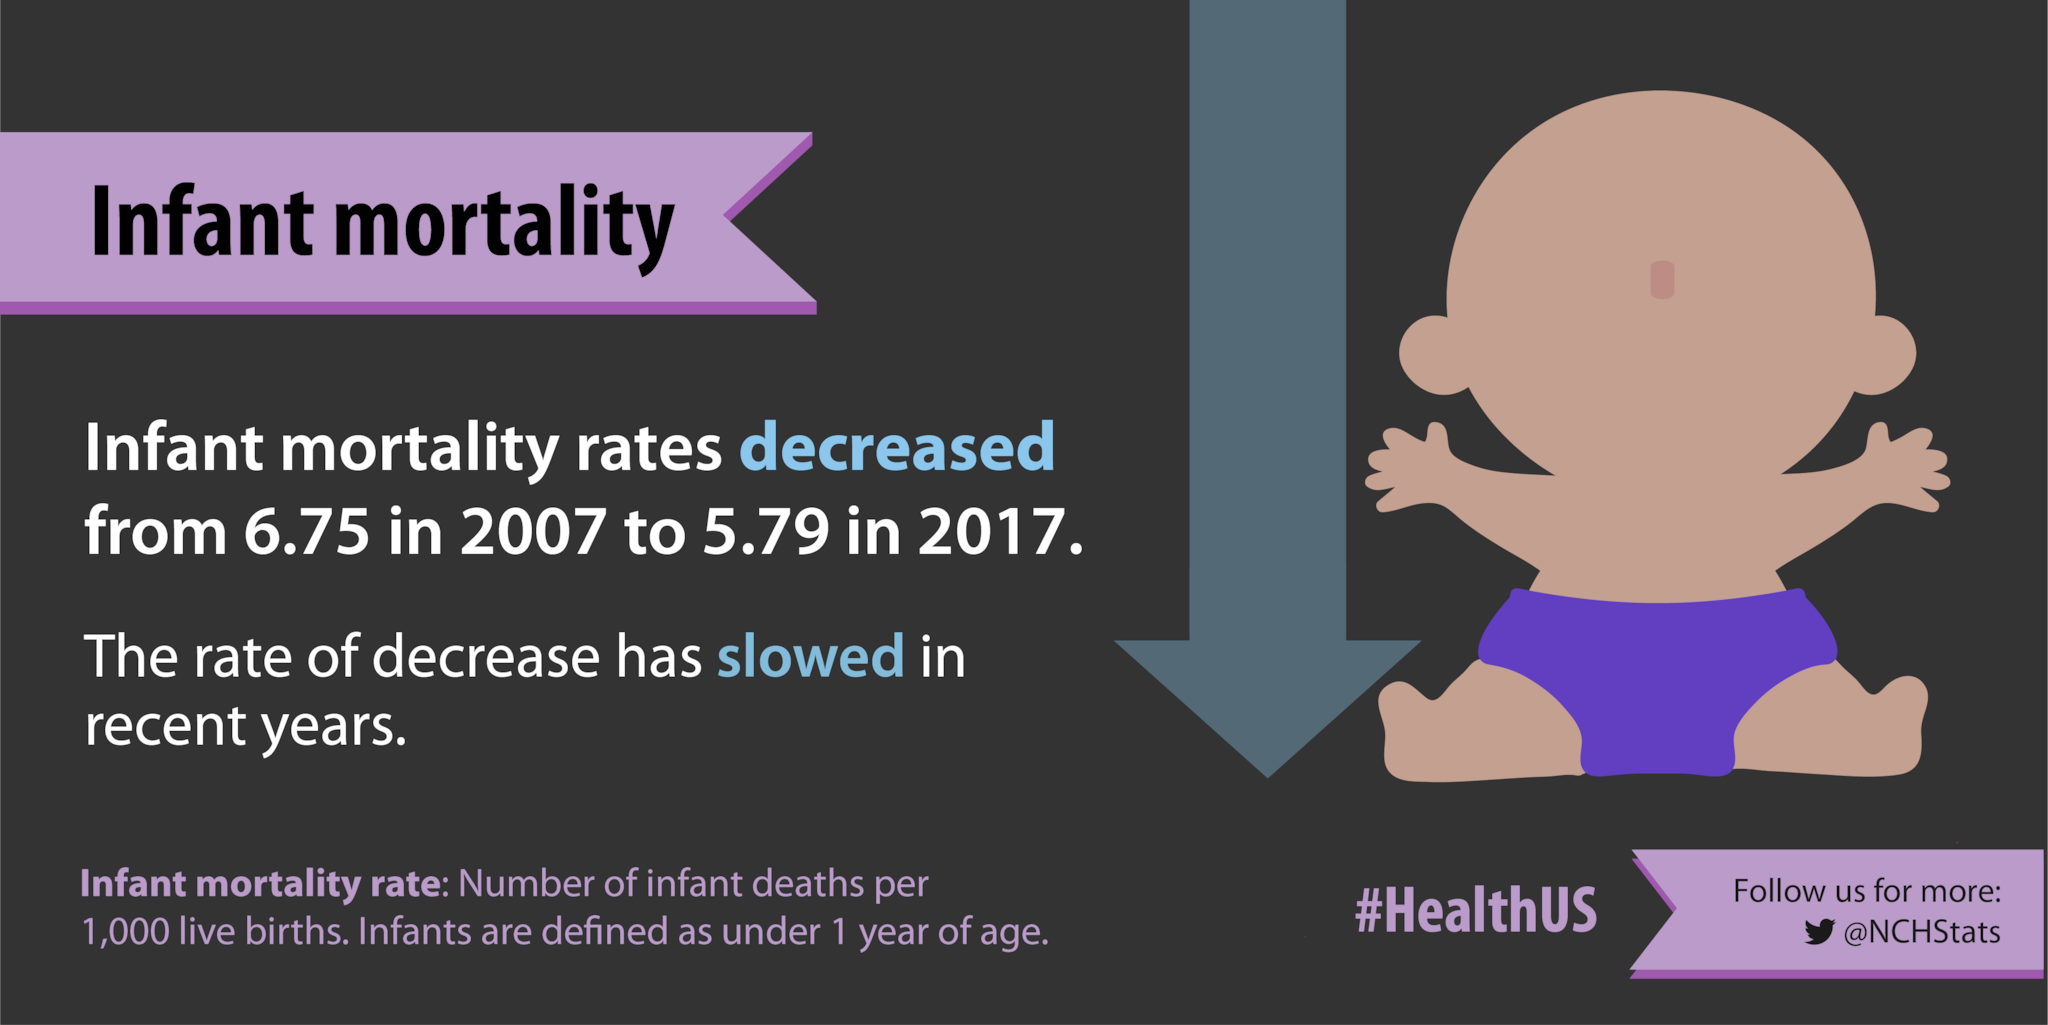 Infant mortality rates decreased from 67.5 in 2007 to 5.79 in 2017.